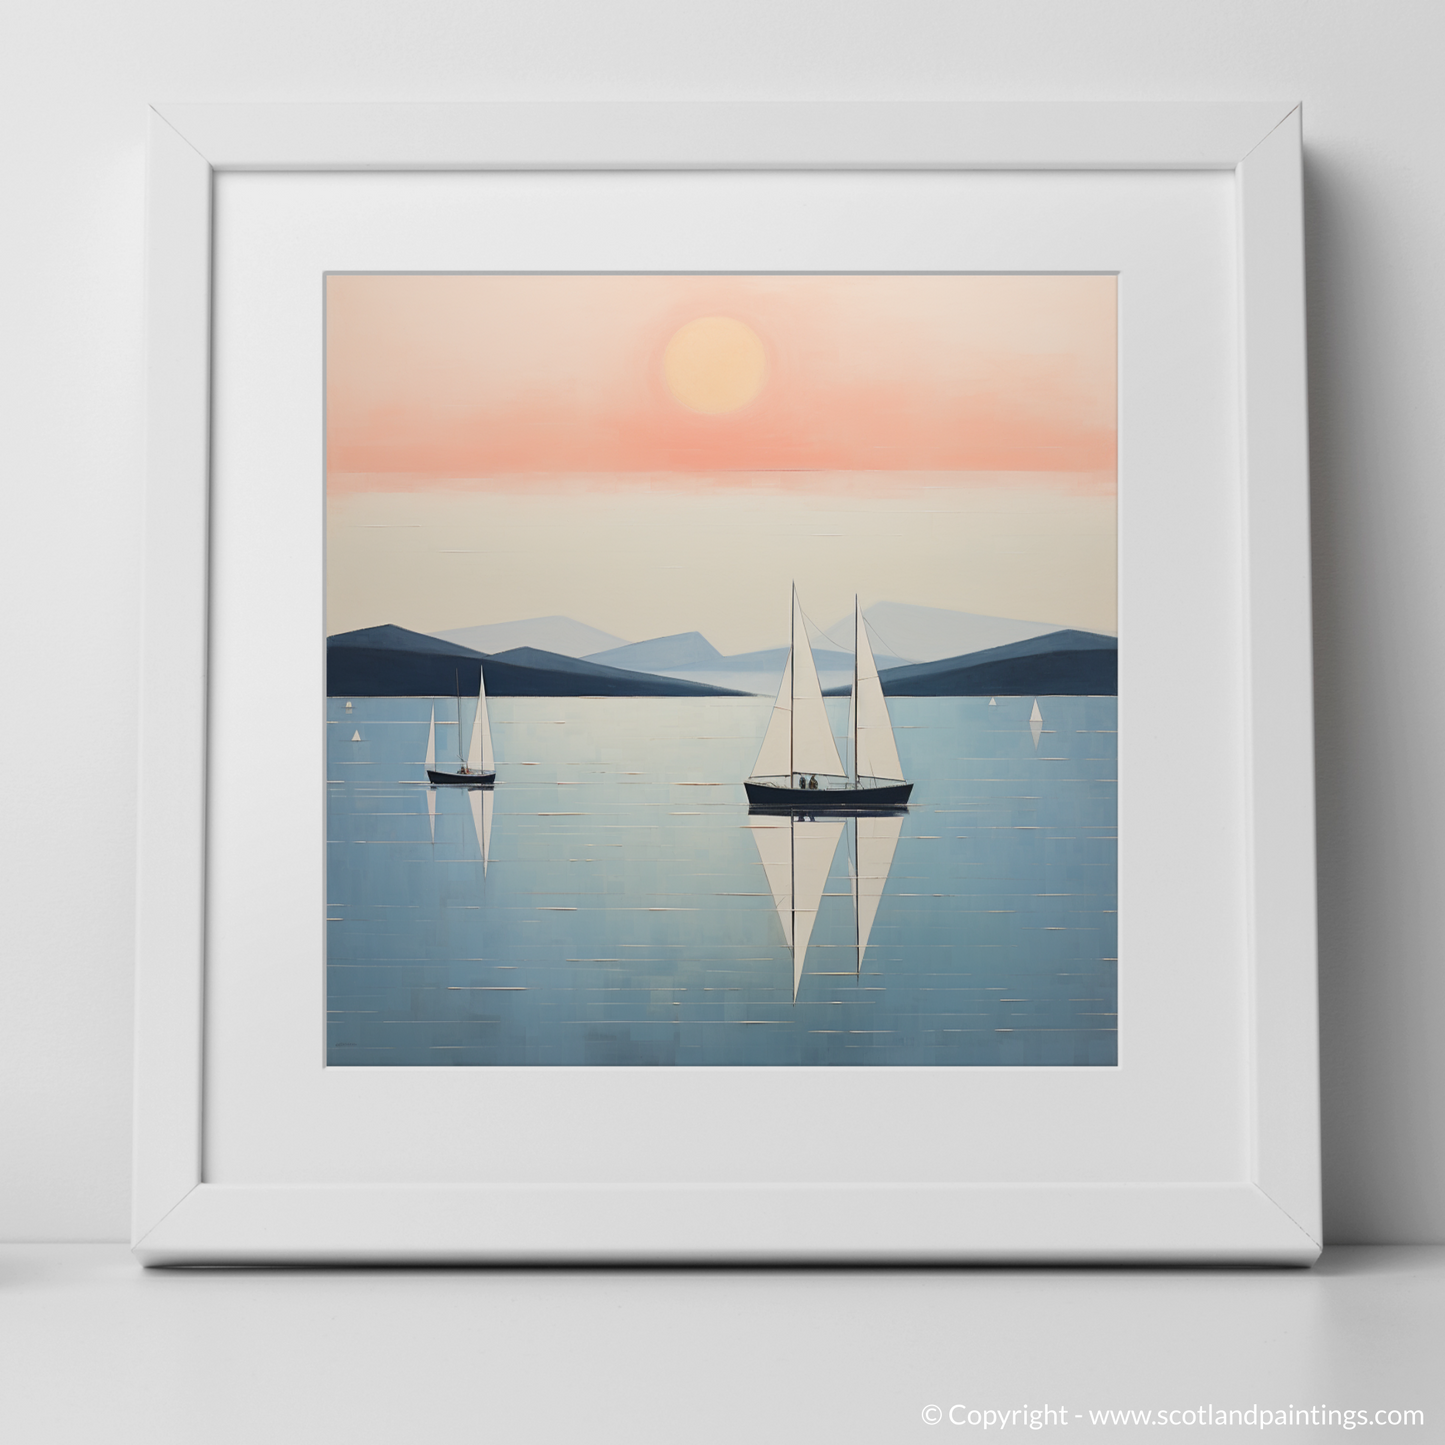 Art Print of Sailing boats on Loch Lomond at sunset with a white frame